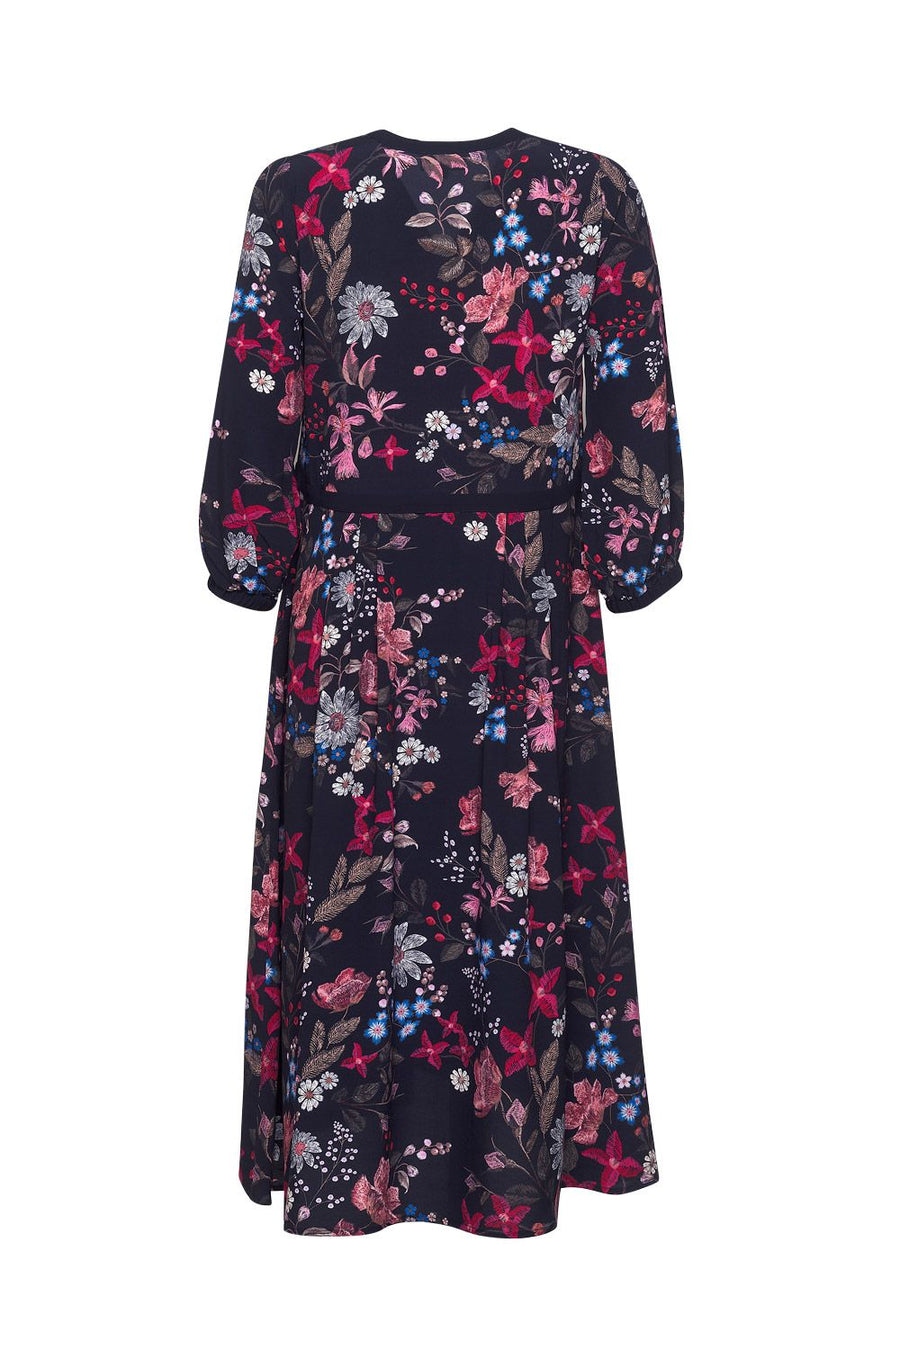 Lovely Midi Dress by Madly Sweetly